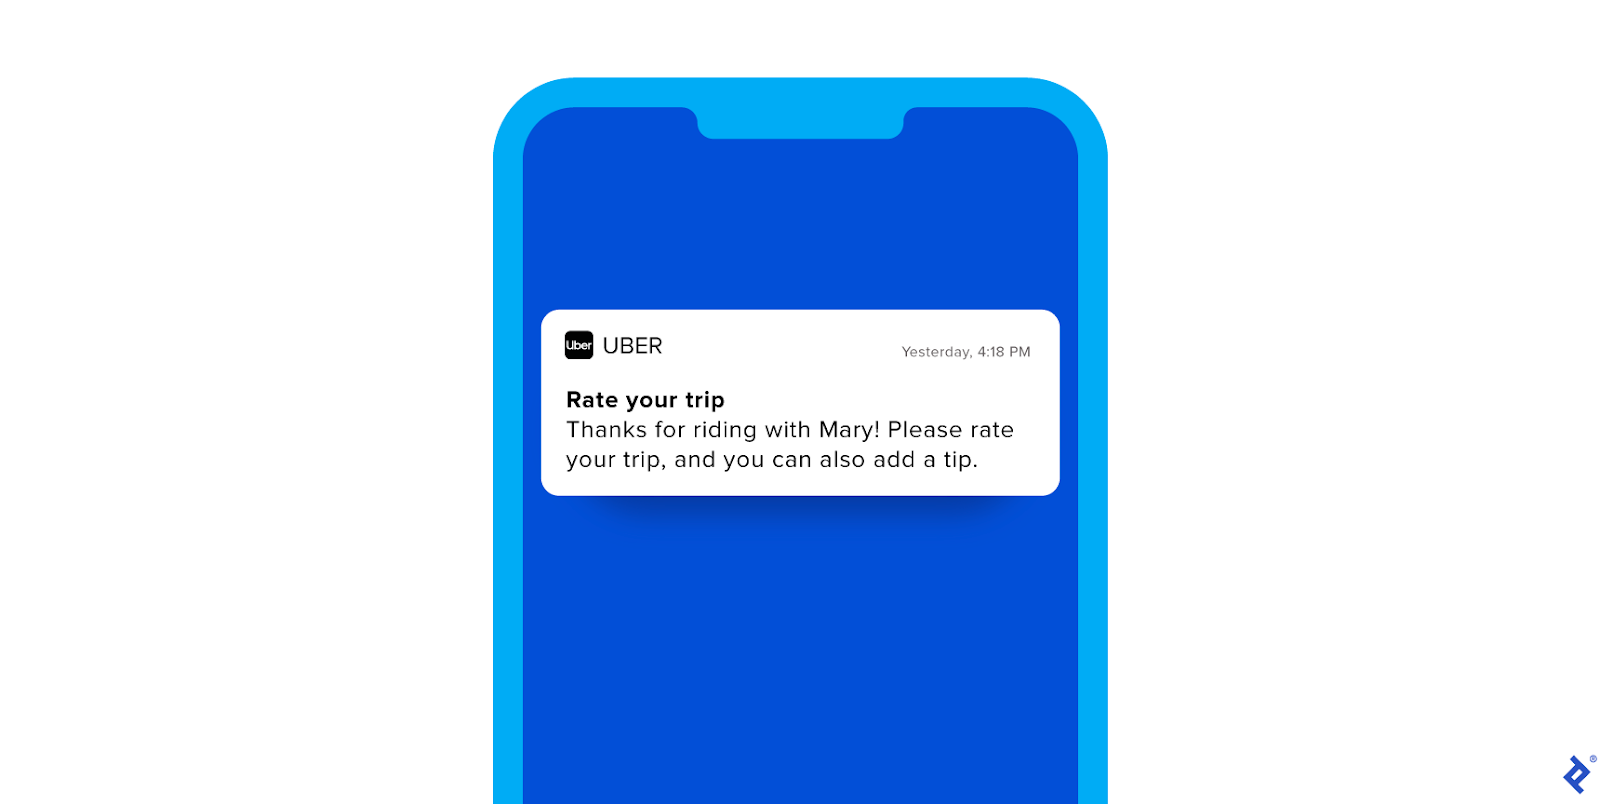 An illustration of a blue mobile phone, with an image of a push notification from Uber. The headline reads âRate your tripâ and the body reads âThanks for riding with Mary! Please rate your trip, and you can also add a tip.â